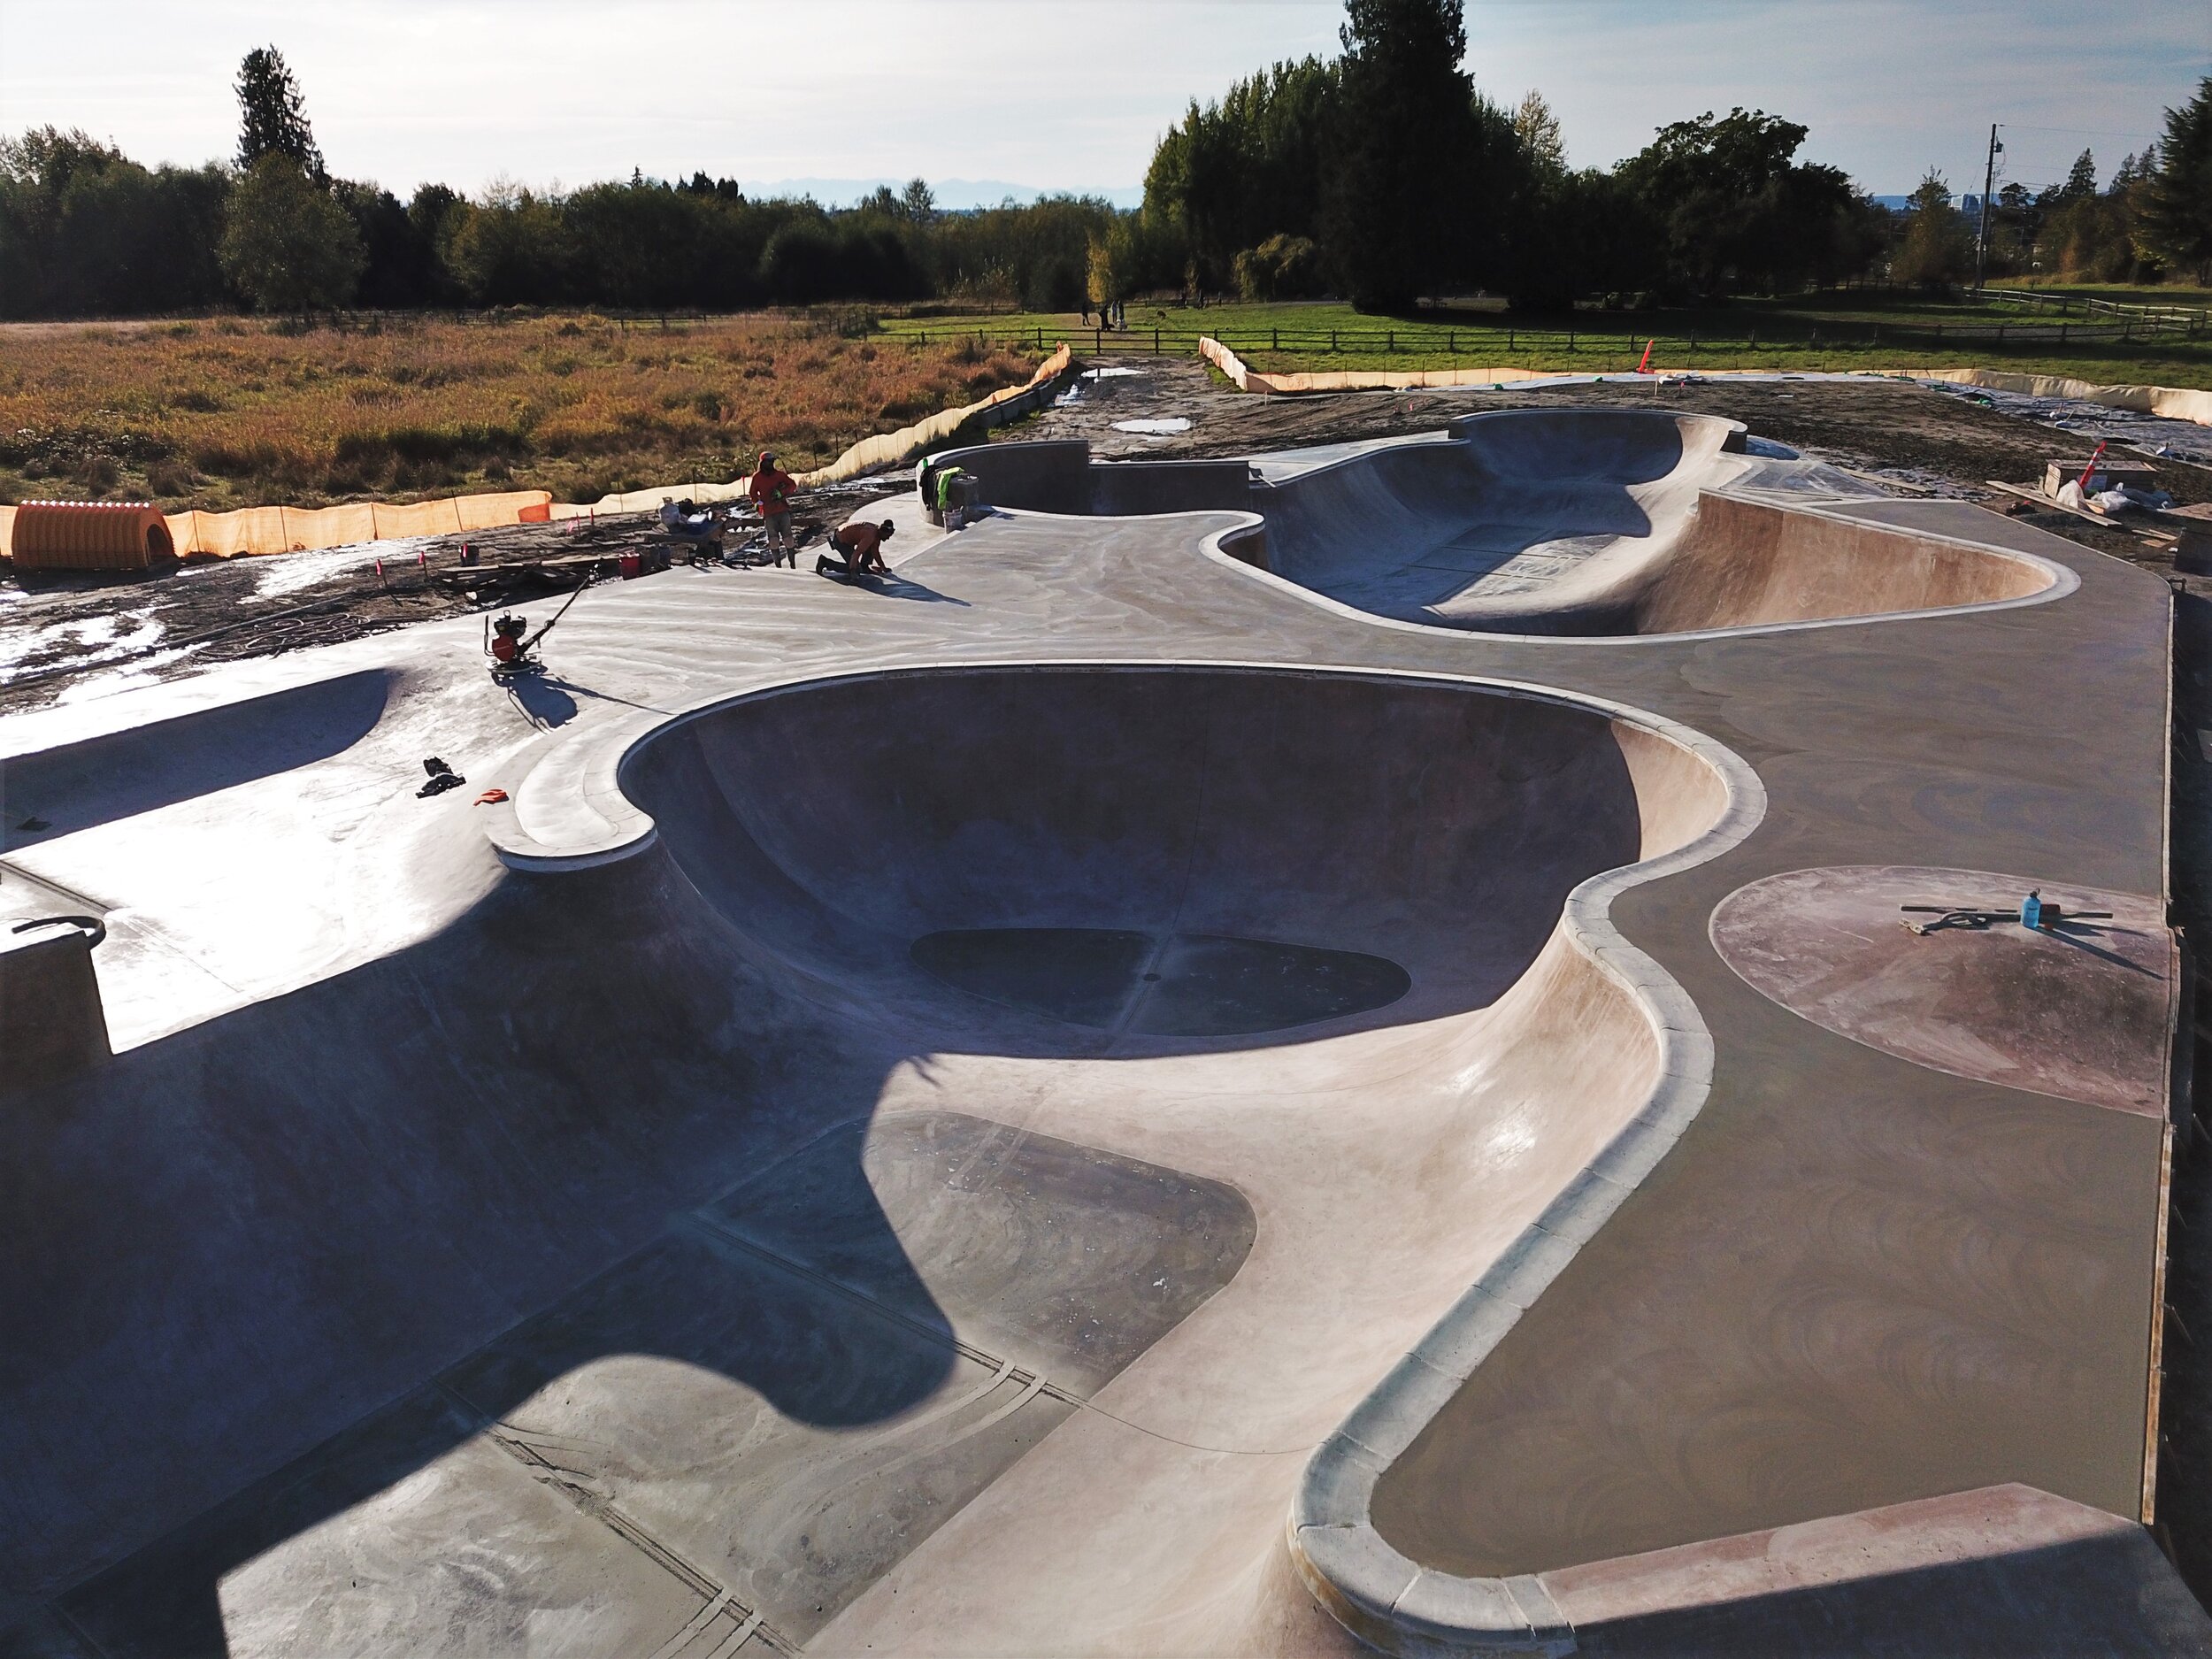 For the pool coping enthusiasts- Lake Stevens, Washington has what you need ✅